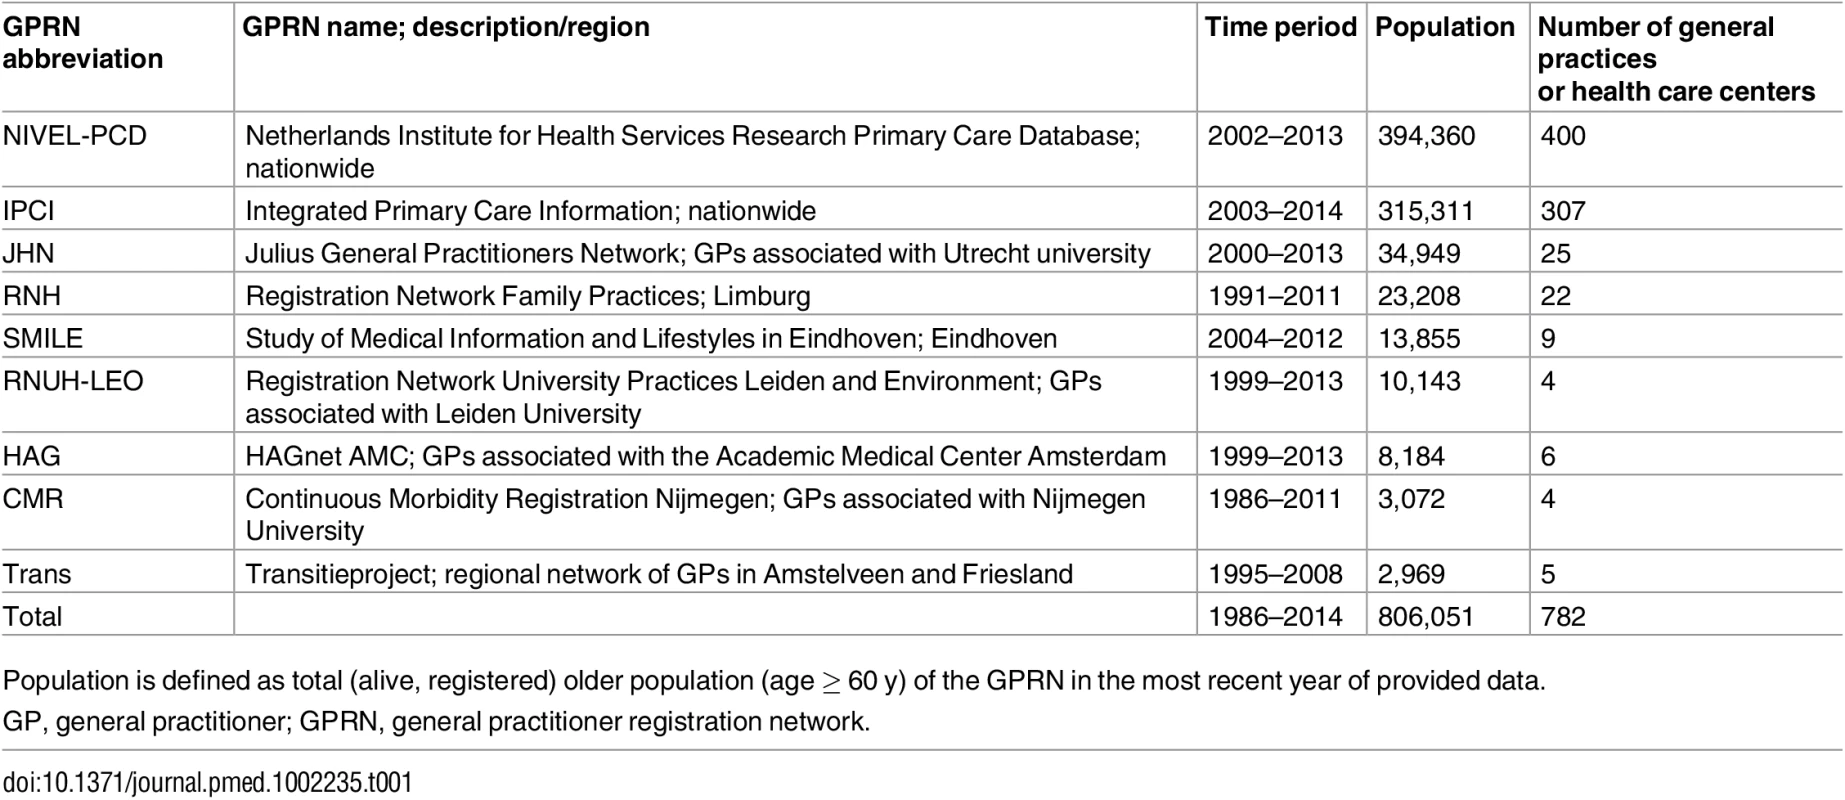 Characteristics of the Dutch general practice registration networks included in this study.